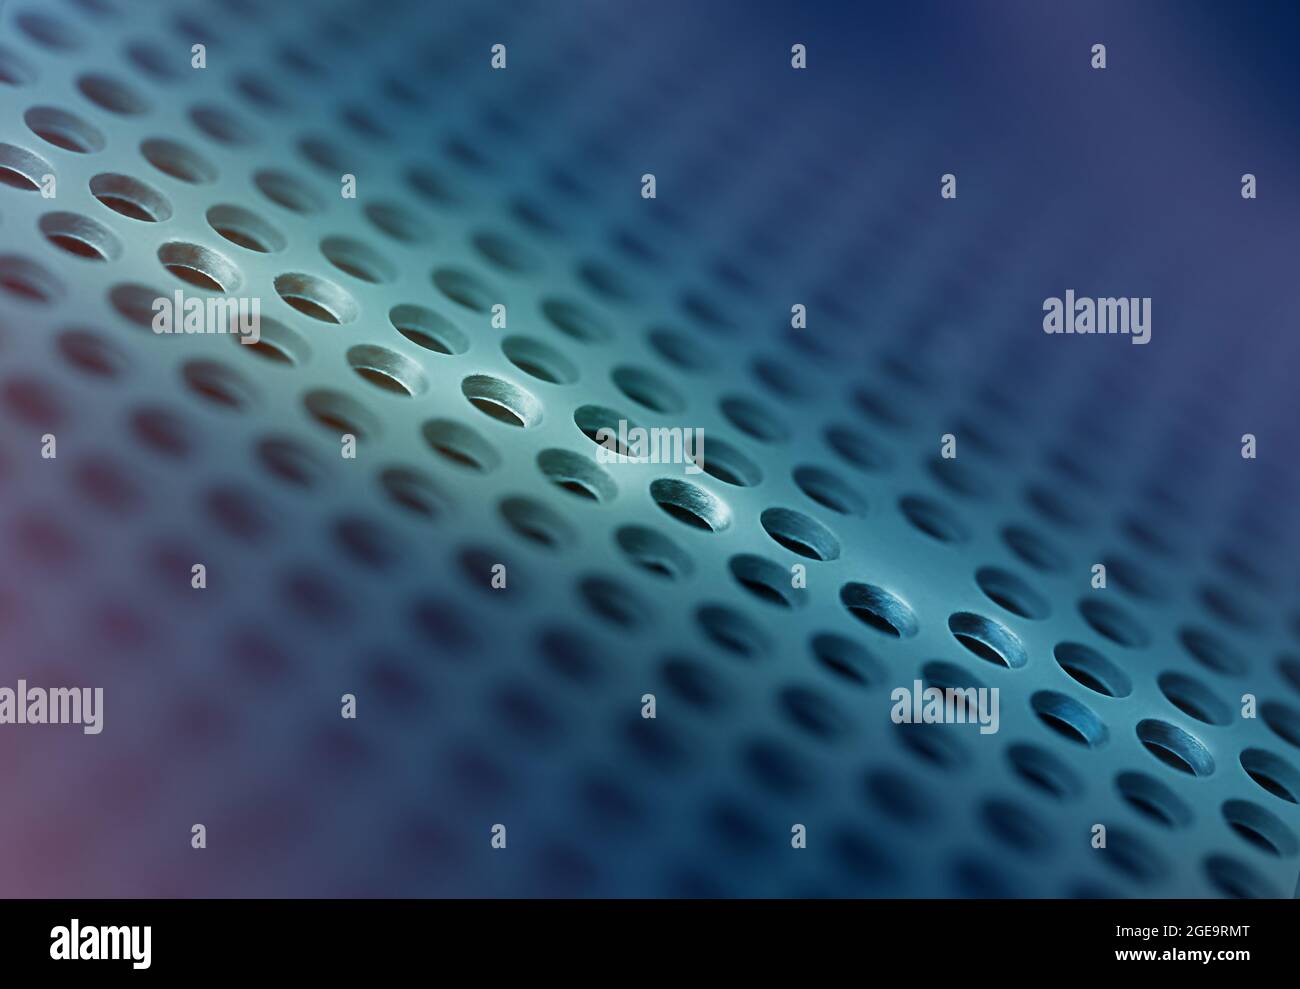 Macro photography on the topic of technology. abstract background of blue color with small holes. The light beam illuminates the space. Stock Photo